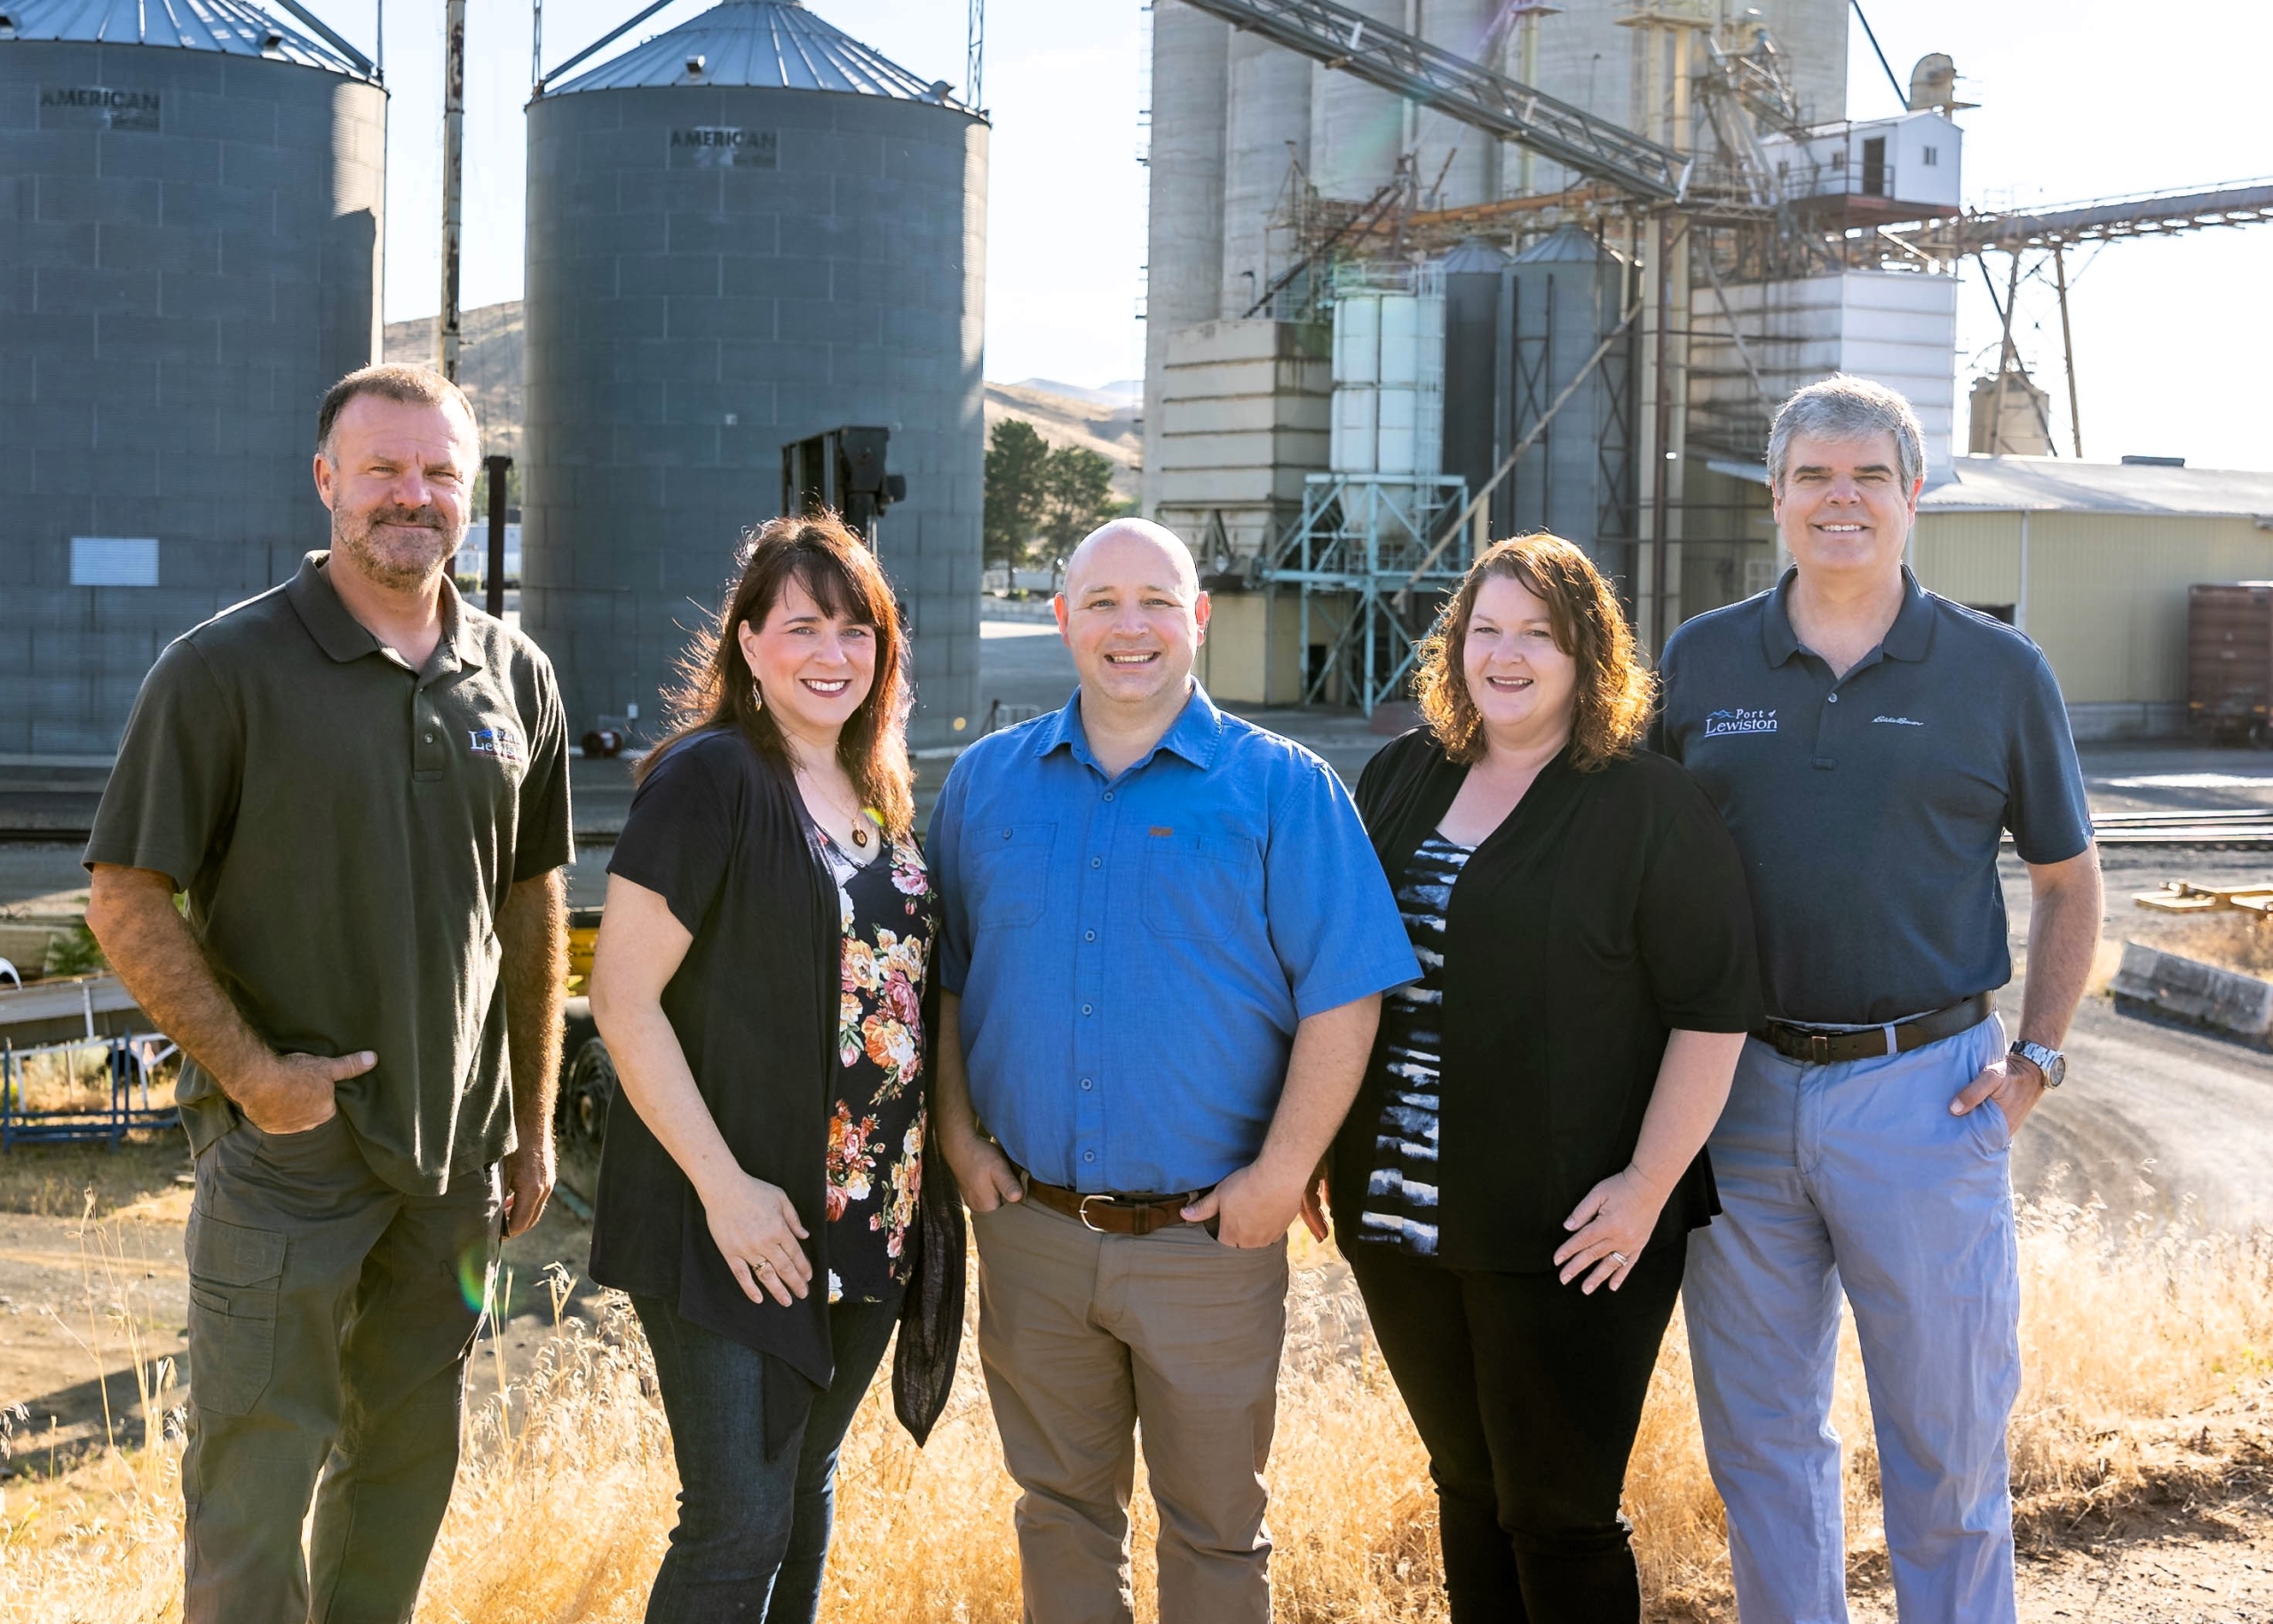 Your Port of Lewiston Team: (L-R) Maintenance Coordinator Chad Smith, Communications Coordinator Mary Iacobelli, Finance & Property Manager Preston Comstock, Operations Manager Jen Blood, and General Manager Scott Corbitt.